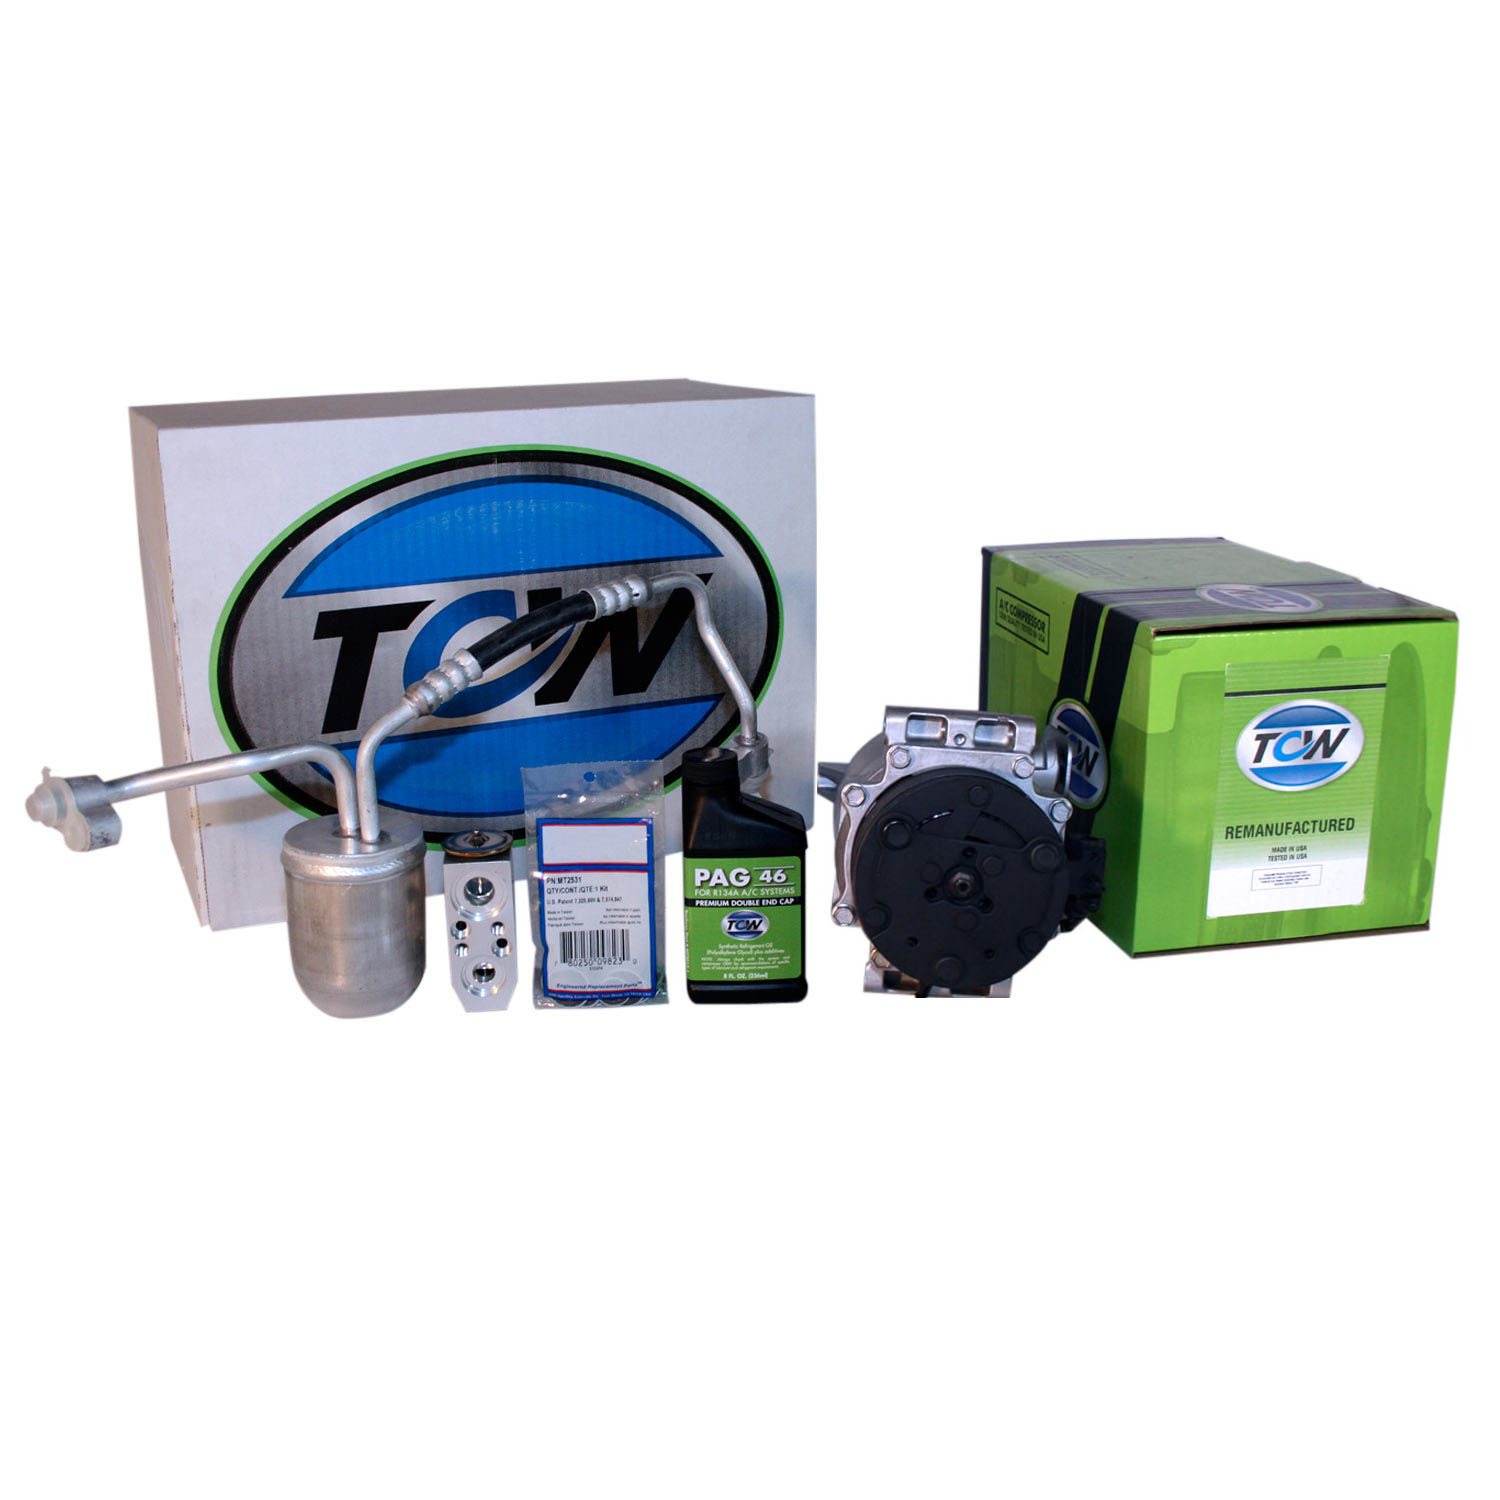 TCW Vehicle A/C Kit K1000340R Remanufactured